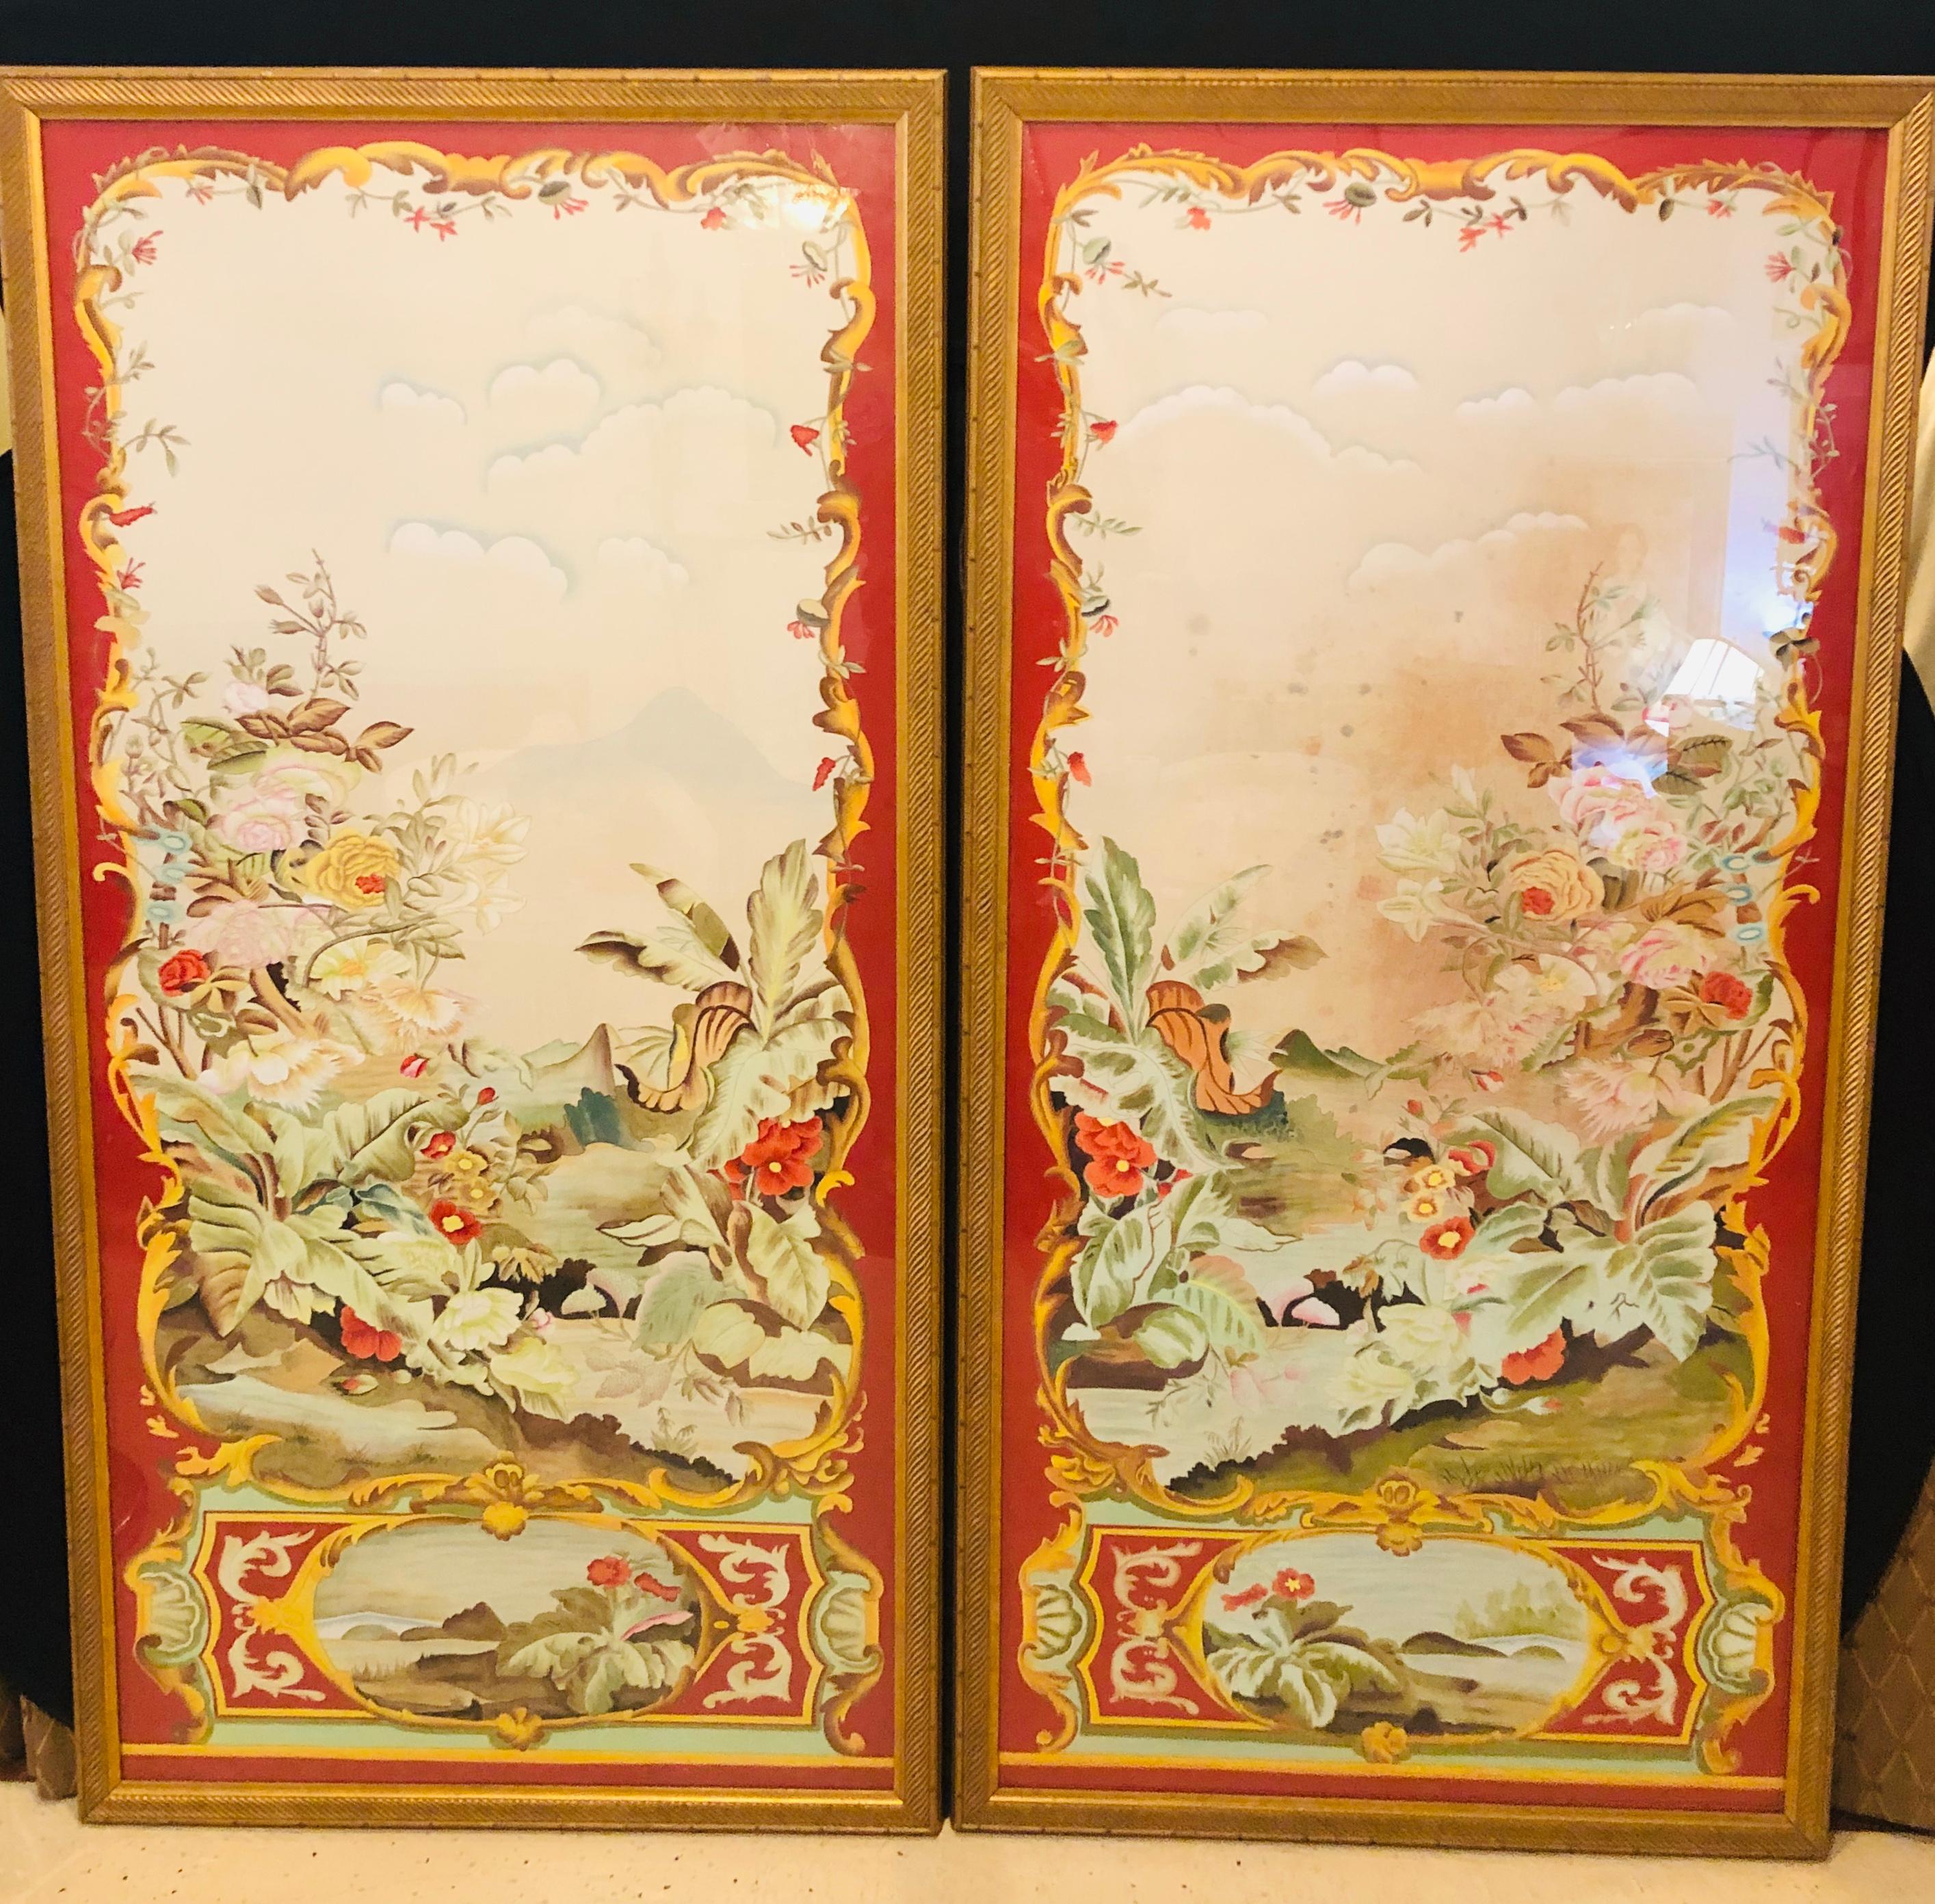 Oriental painted silk panels on fine gilt frames under plexiglass. A pair of very decorative panels under plexi in the finest of gilt frames. These large and impressive works are certain to add glamour to any setting. One with a slight stain